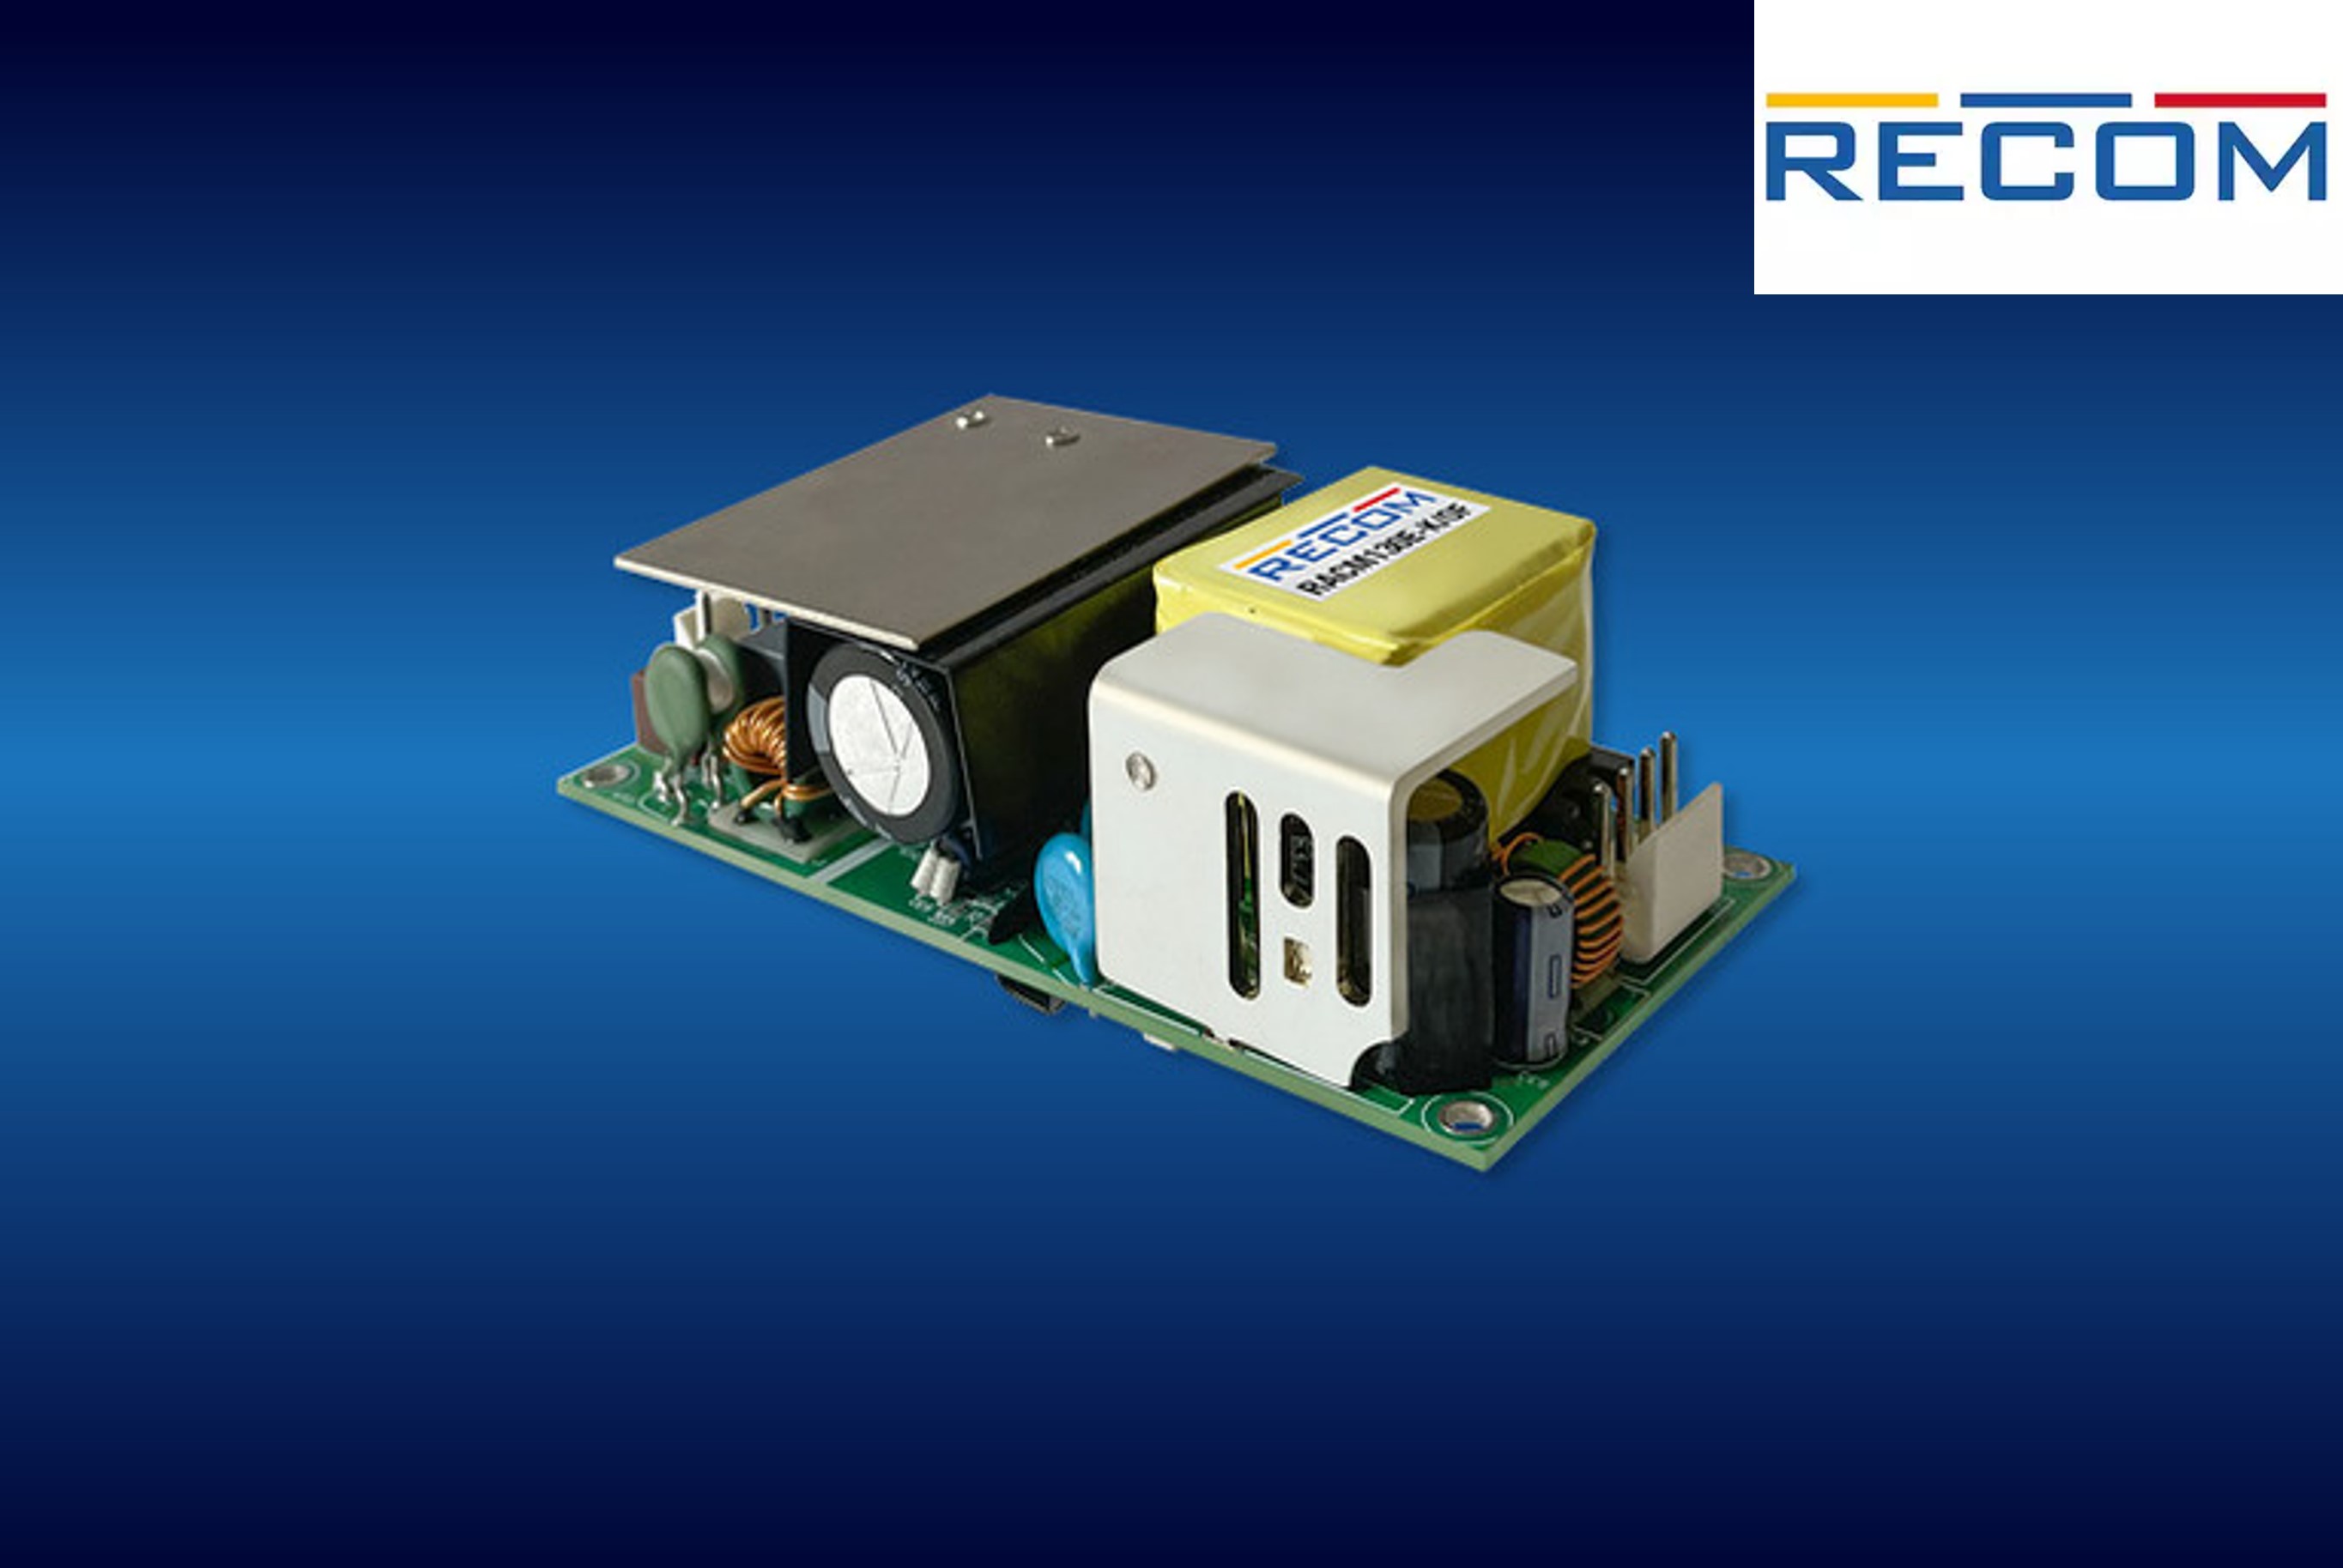 RECOM adds to AC/DC range with 130W product including comprehensive certifications